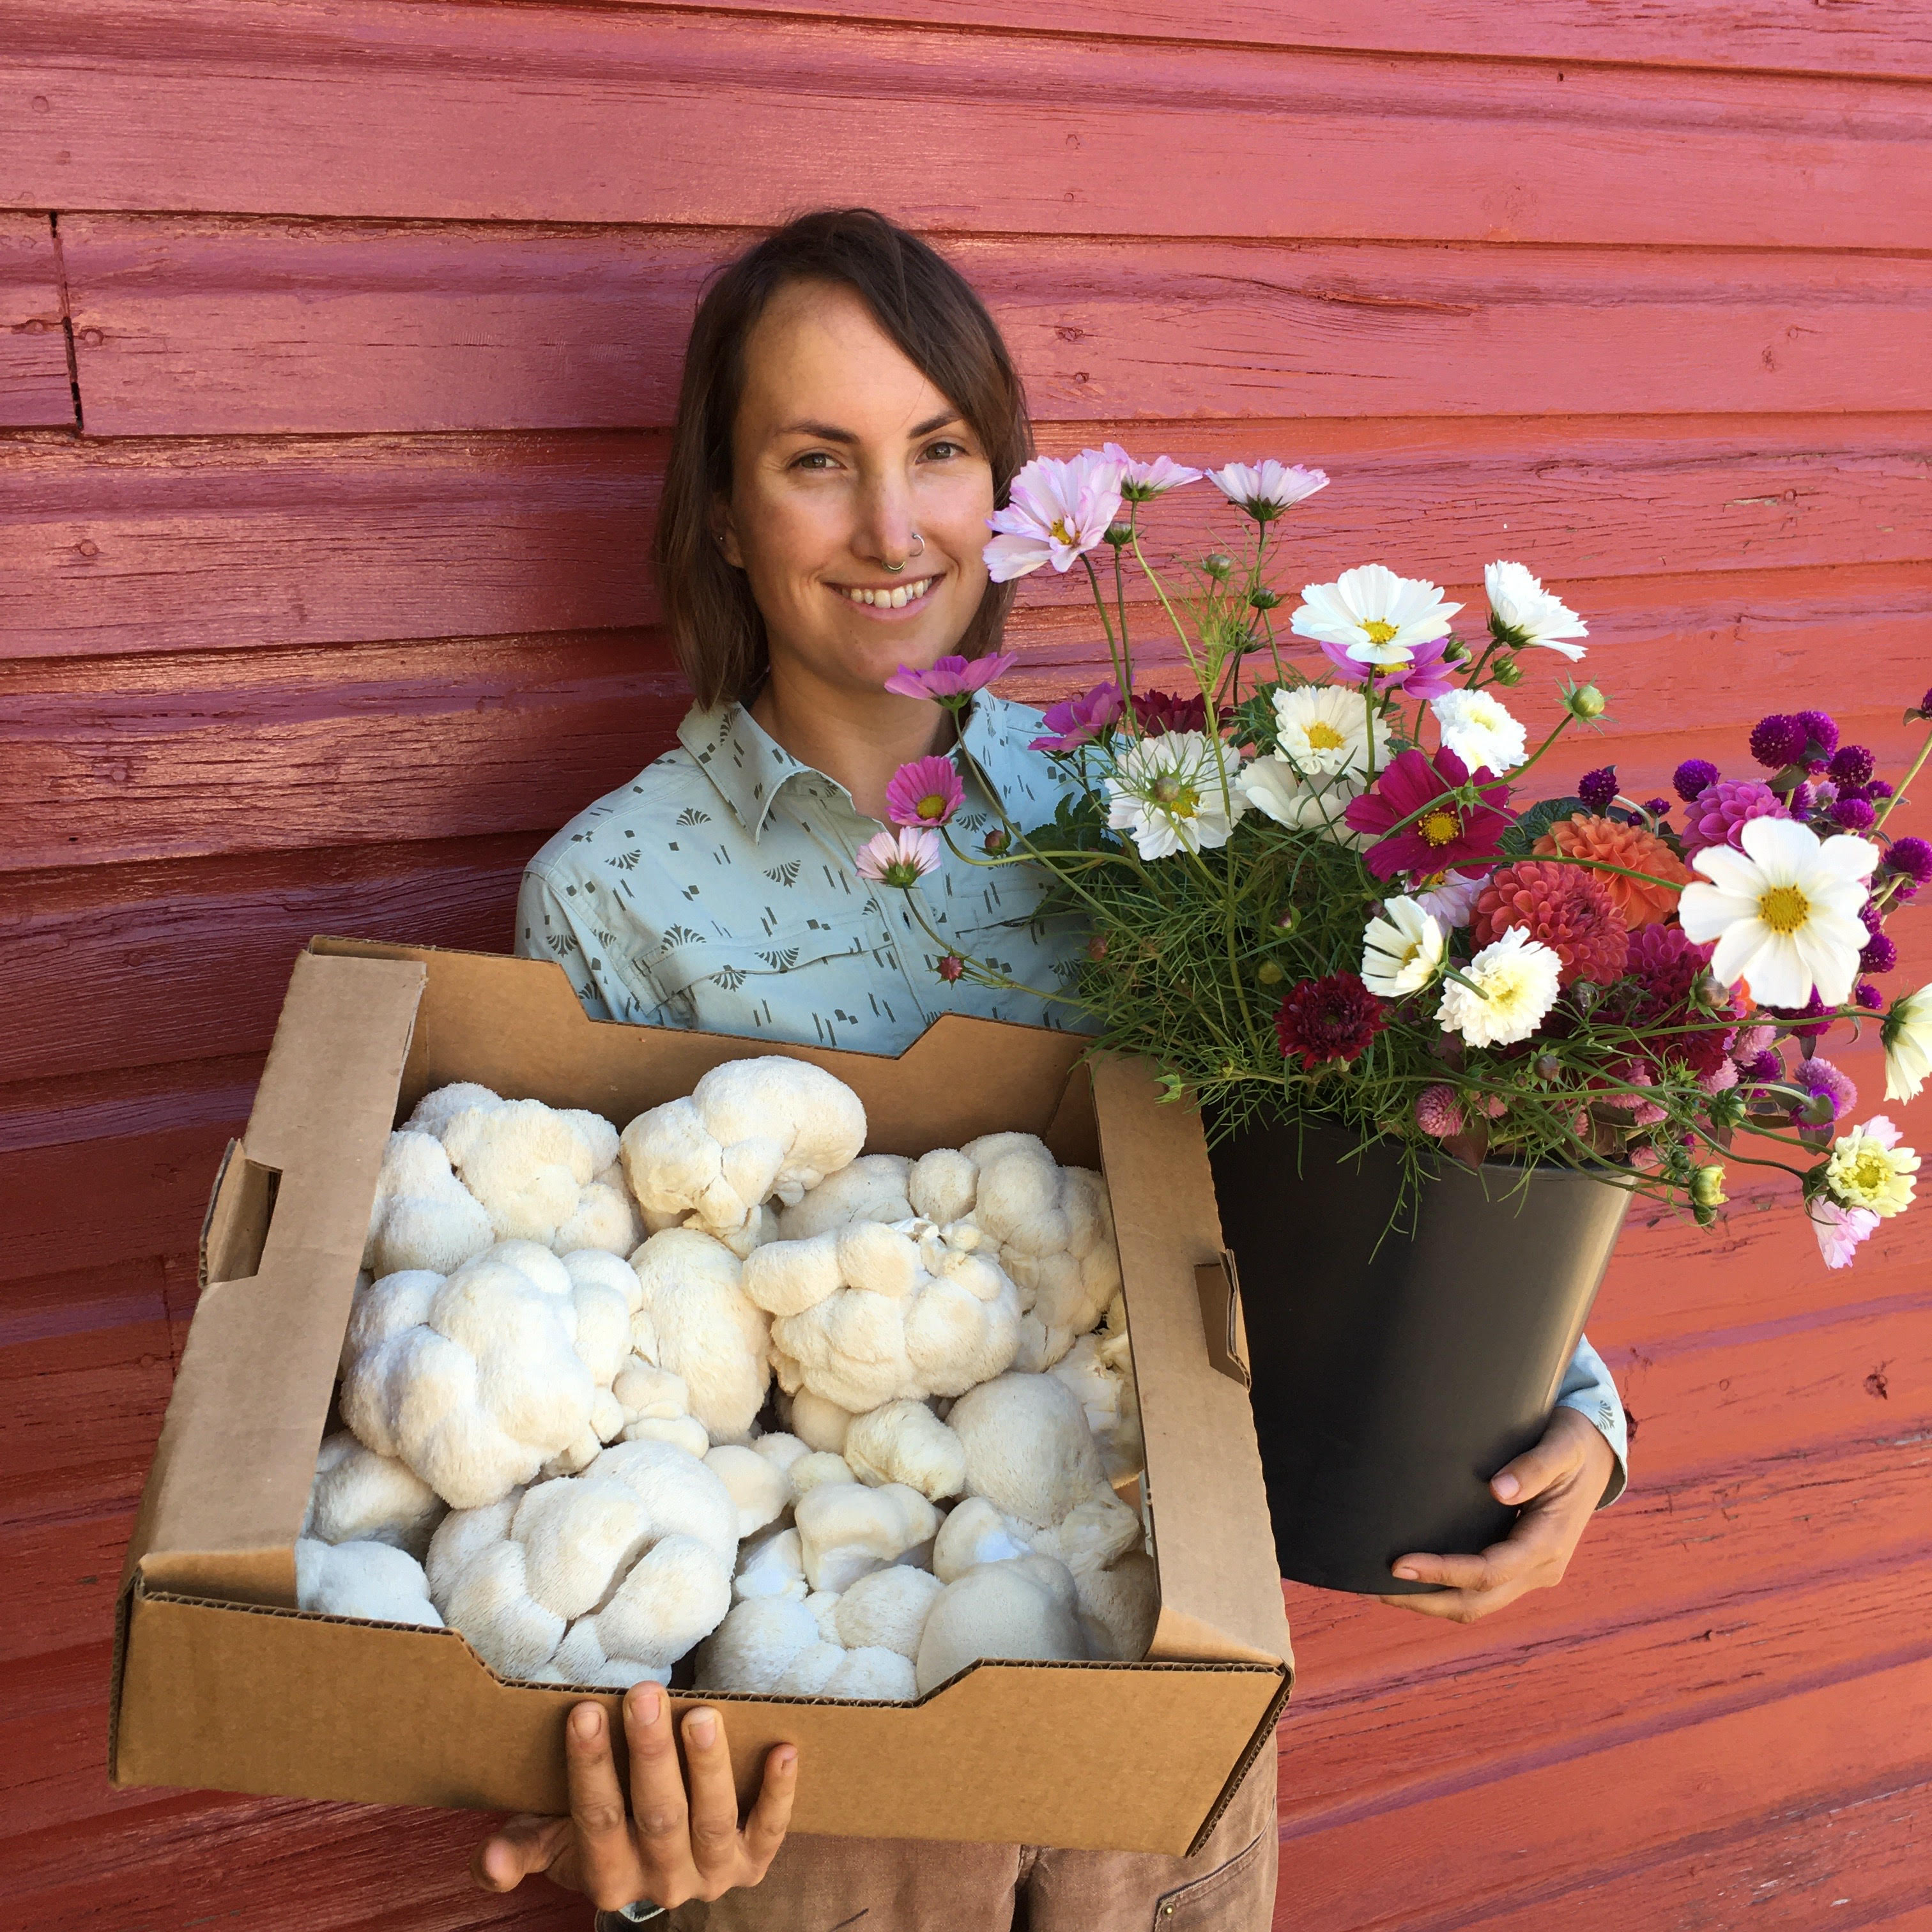 Farmer Courtney Cohen holding a box of mushrooms in her right hand and a put of flowers in her left hand.